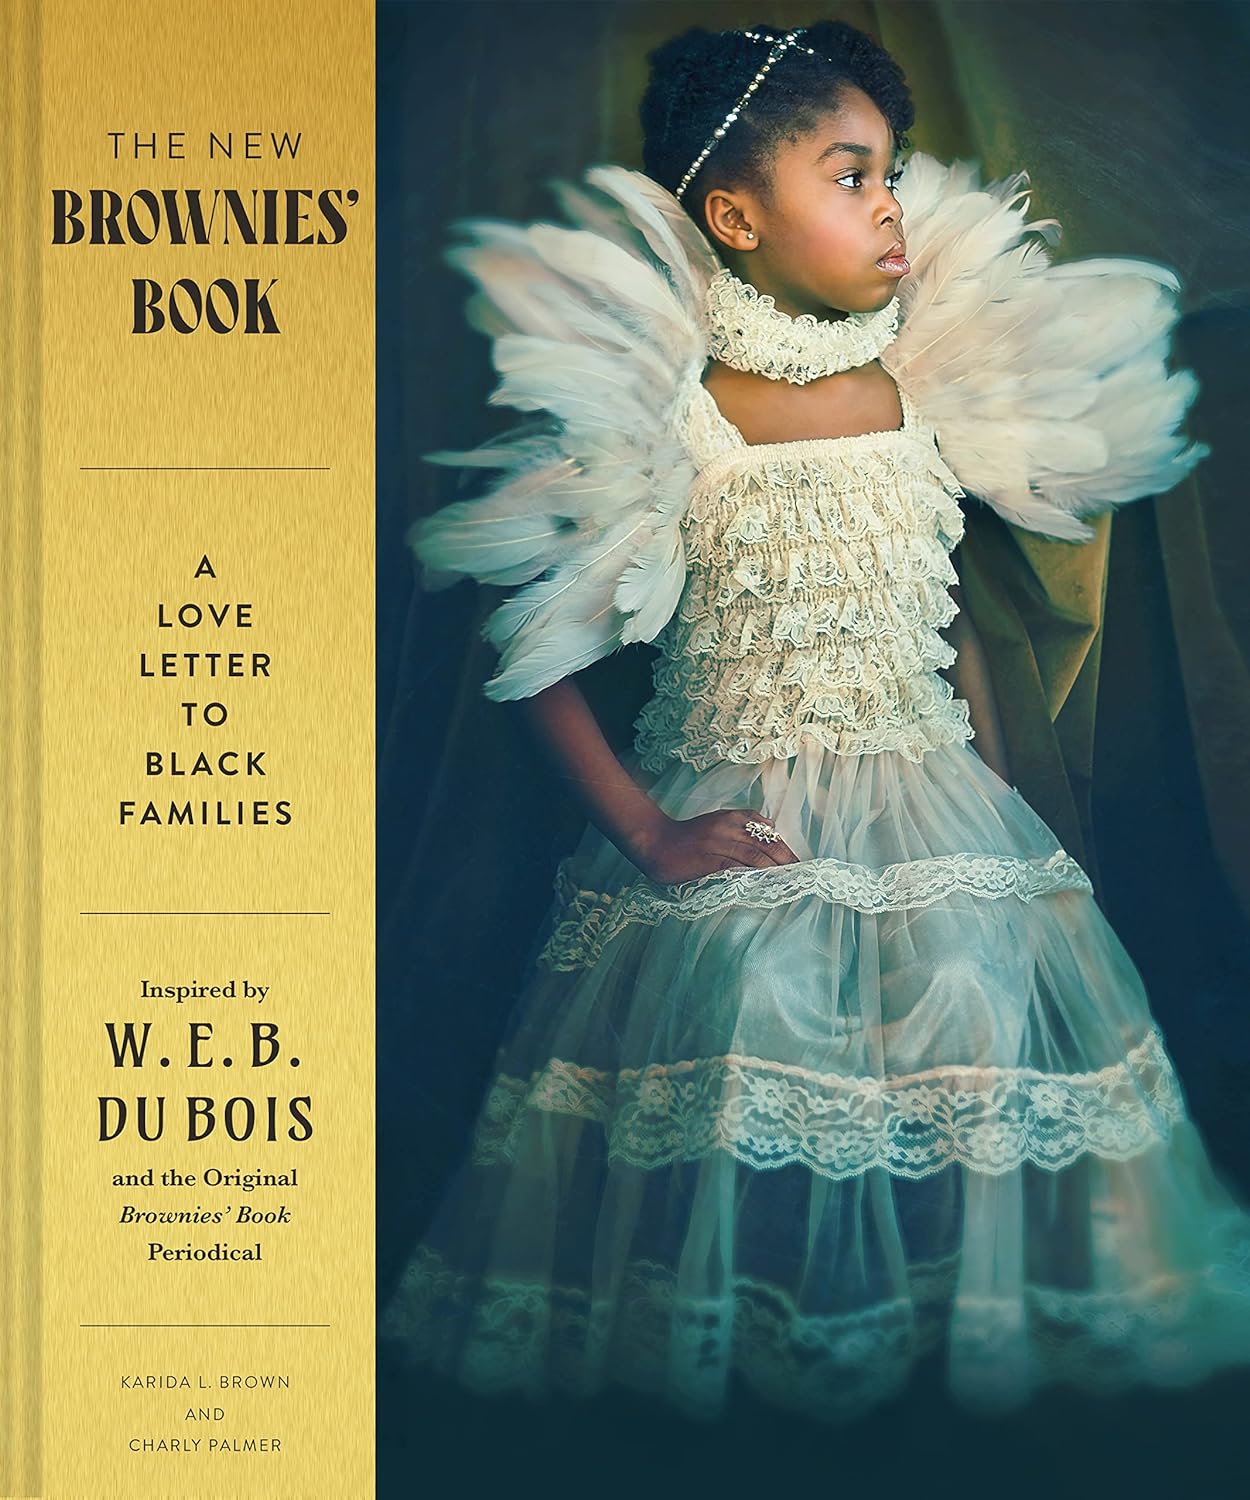 A book cover depicting a little Black girl wearing a frilled and lace gown with prominent shoulders. She is standing proudly.